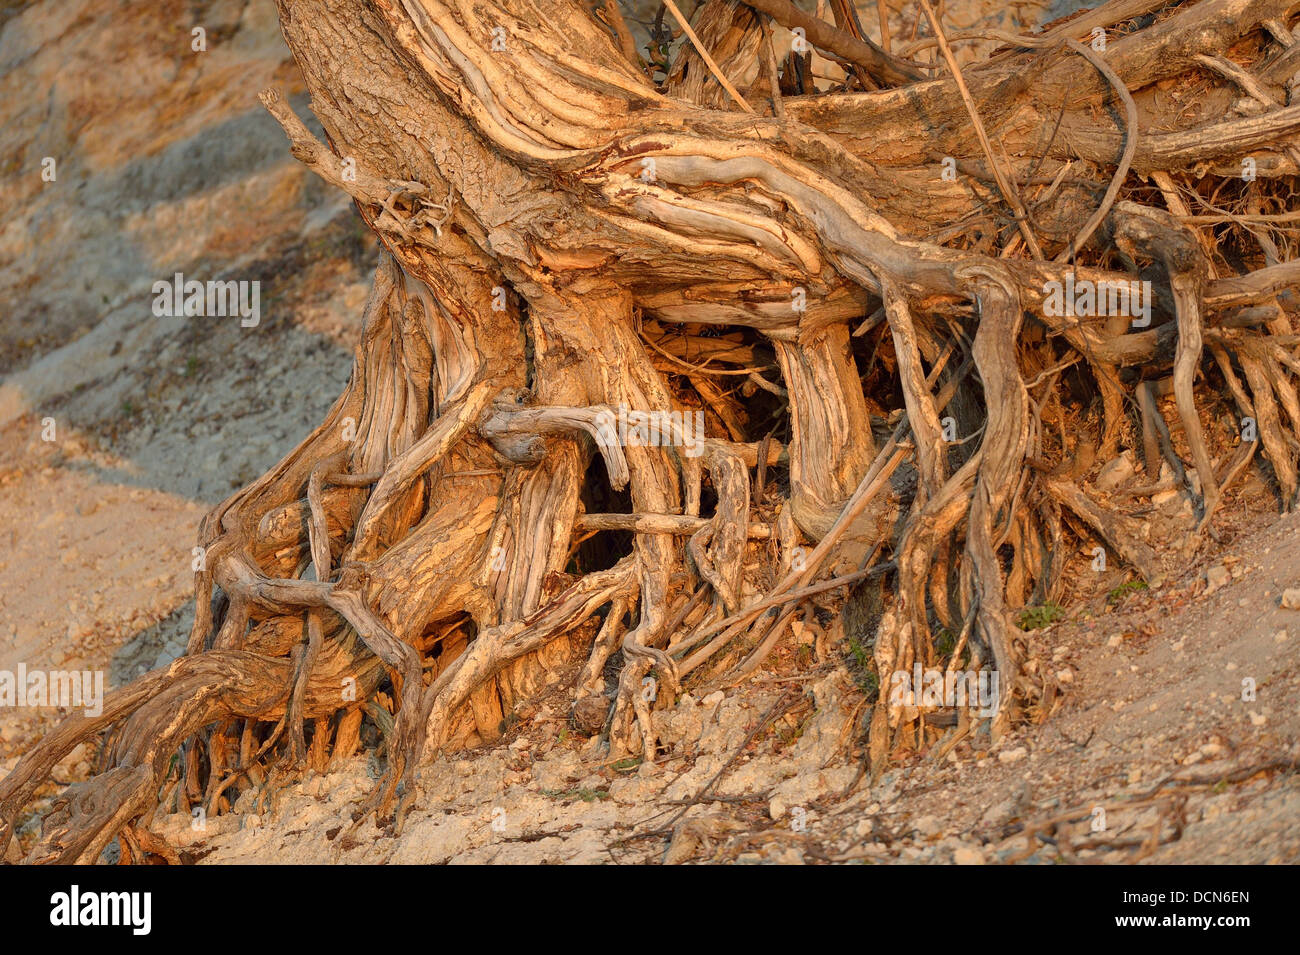 Open tree roots along a river bed in Southern Africa Stock Photo